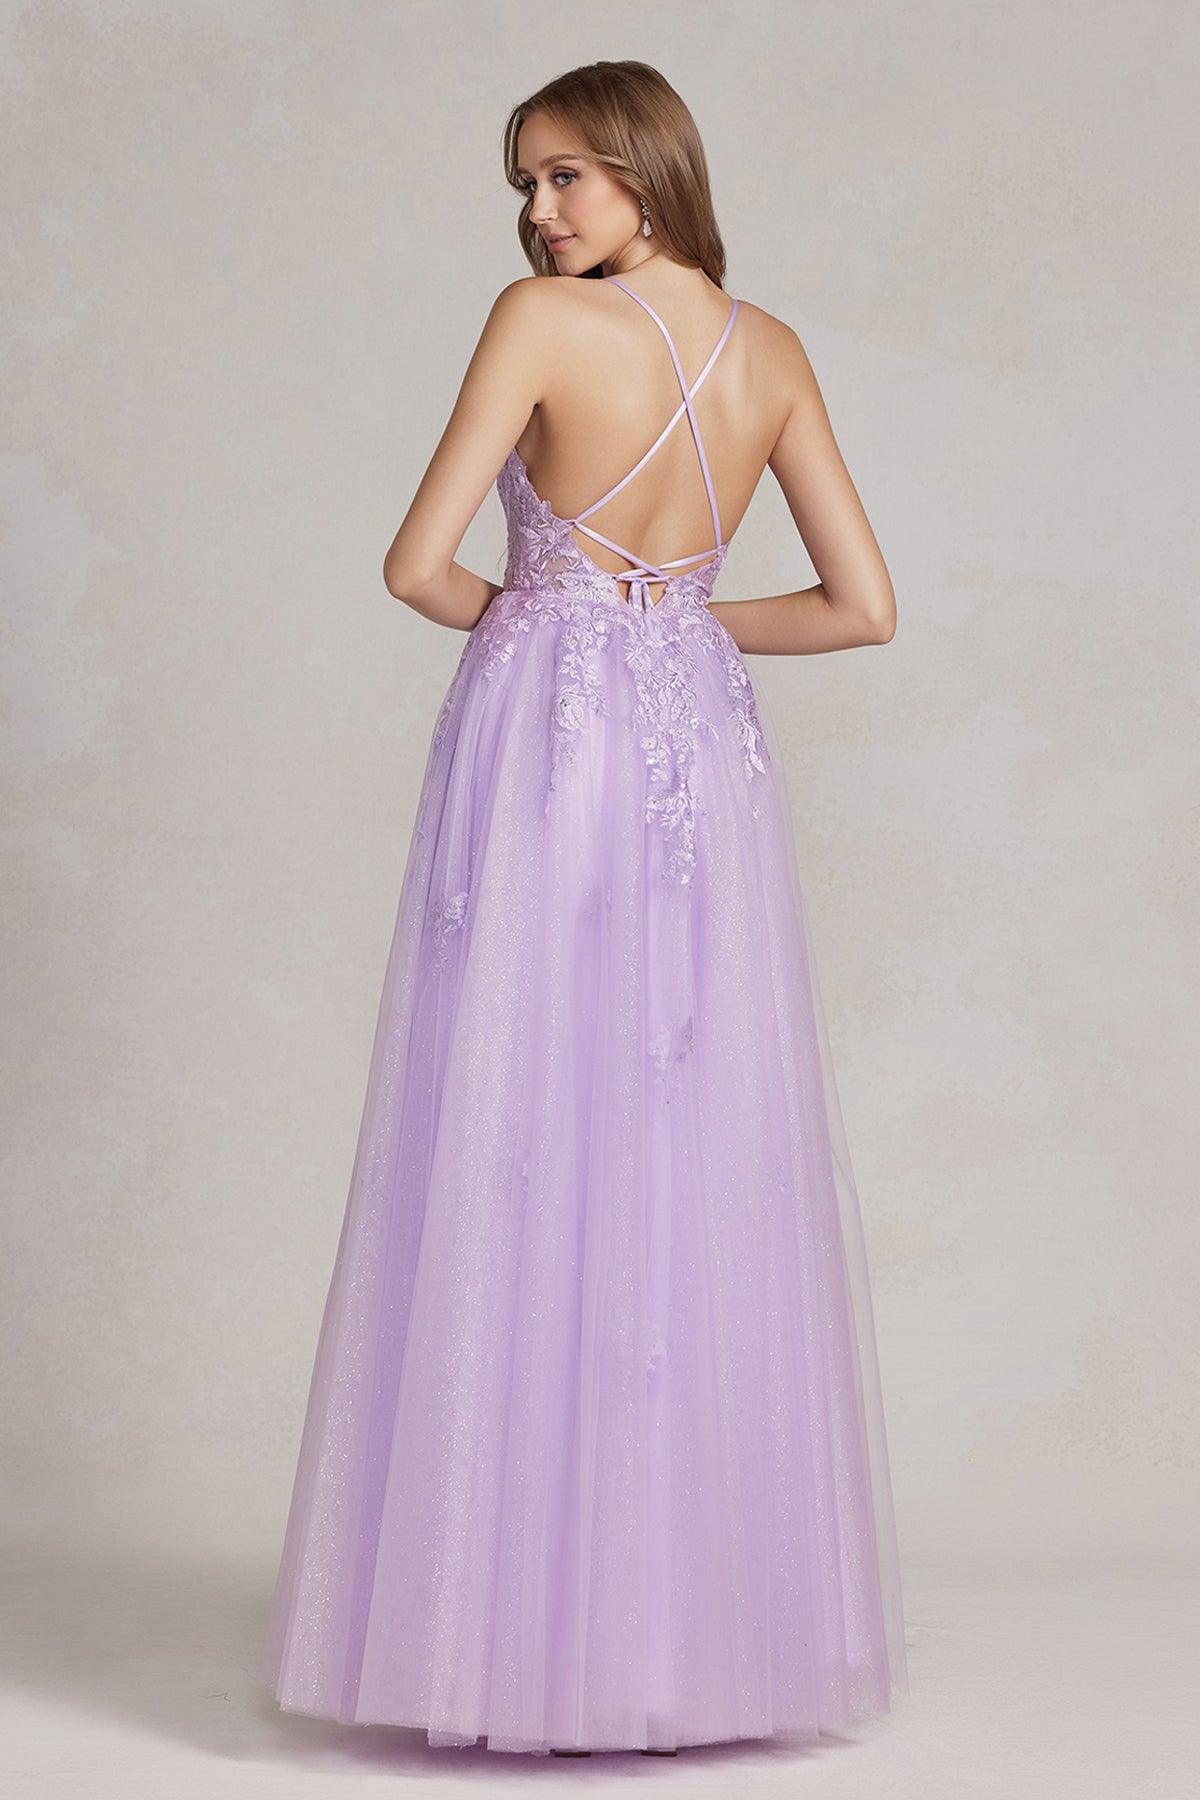 Nox Anabel T1081 Long Sexy A Line Prom Dress Lilac